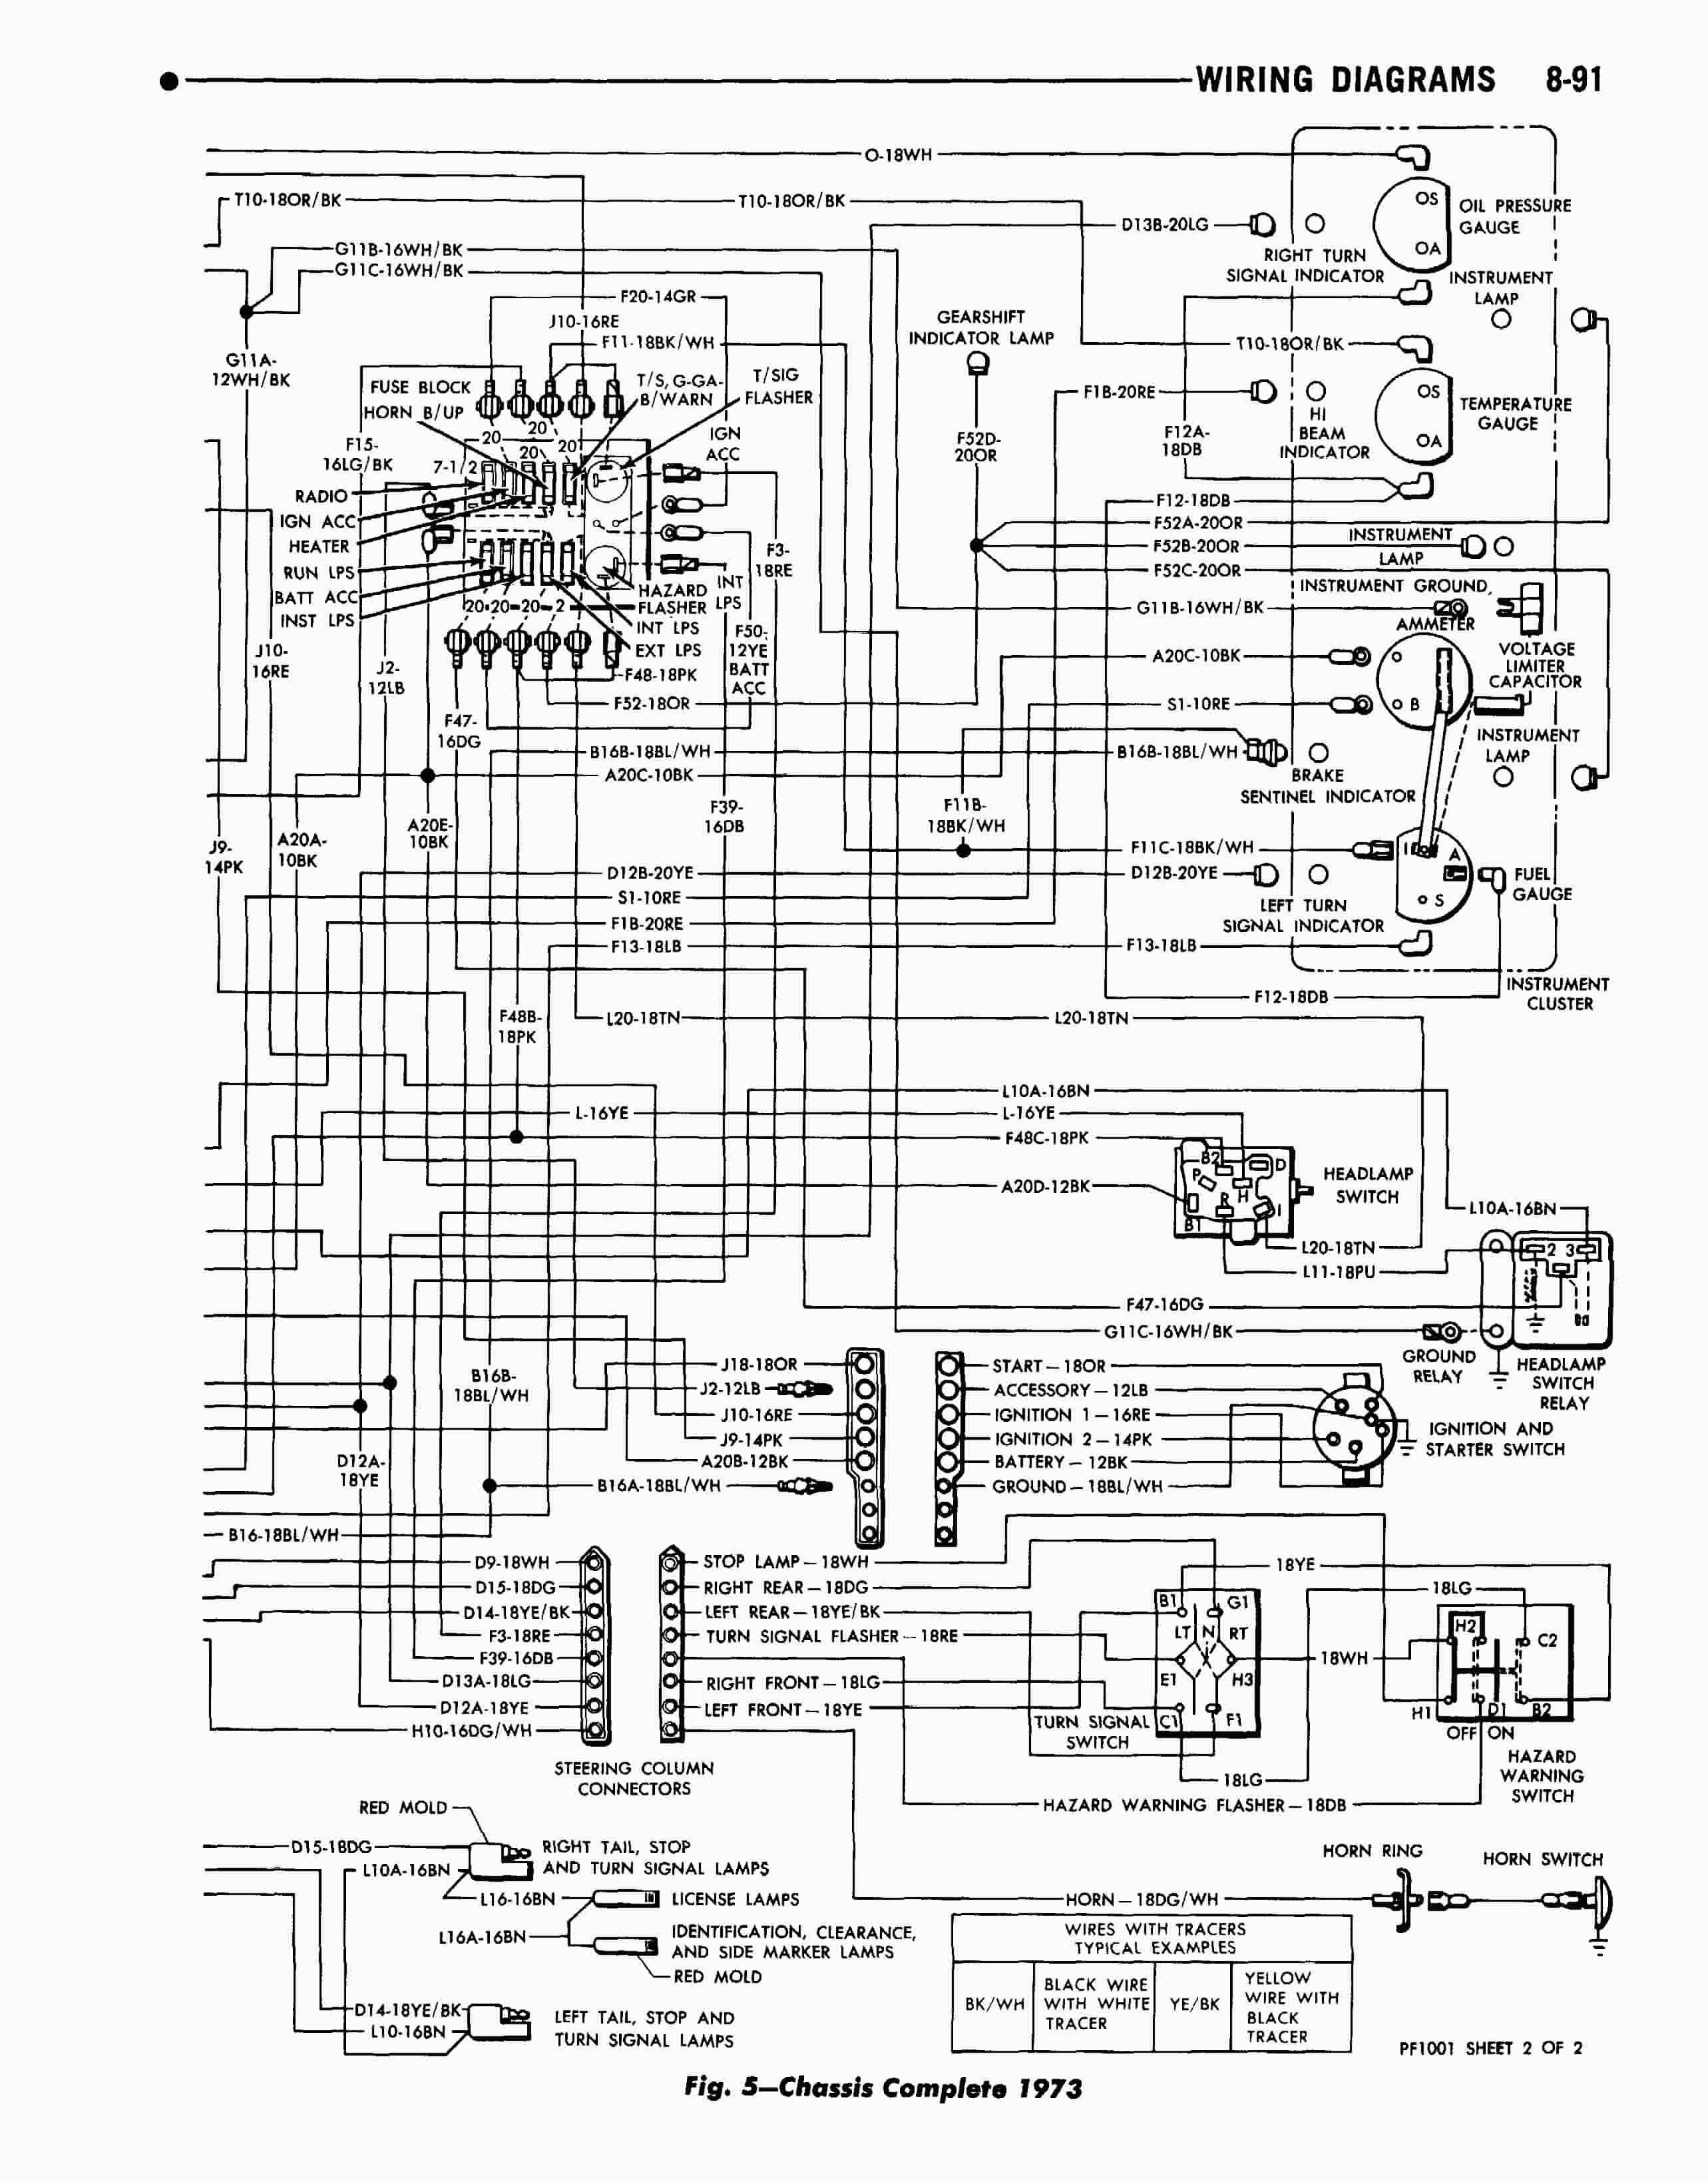 Ford F53 Wiring | Wiring Diagram - Ford F53 Motorhome Chassis Wiring Diagram